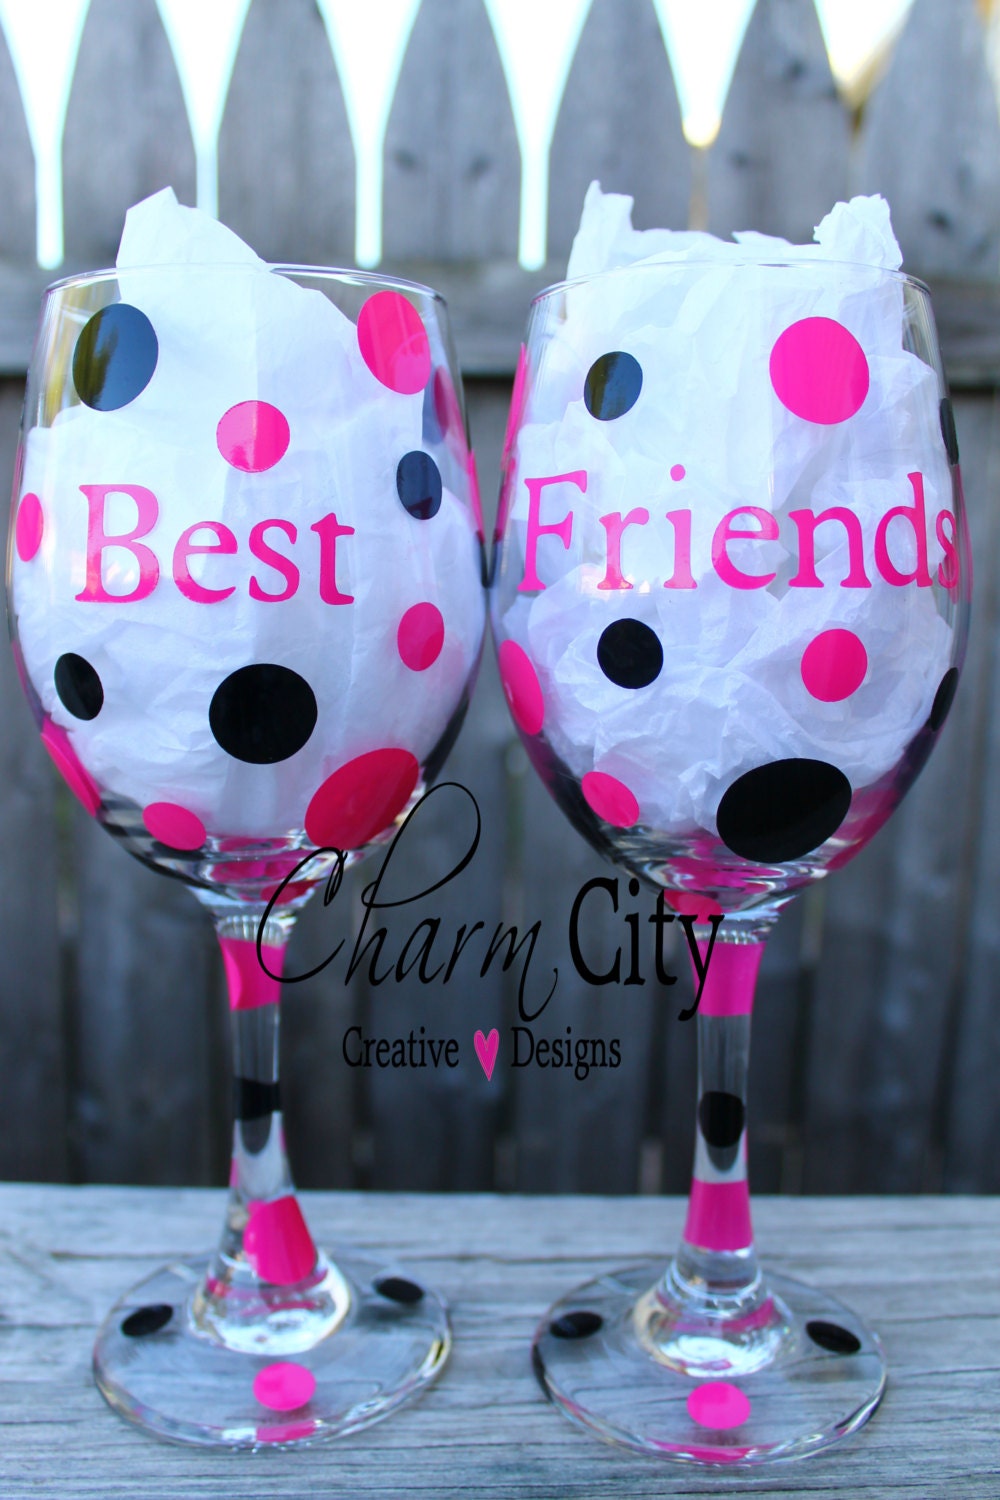 Best Friends Wine Glasses 20 Oz Set Of 2 Holiday By Ahindle78